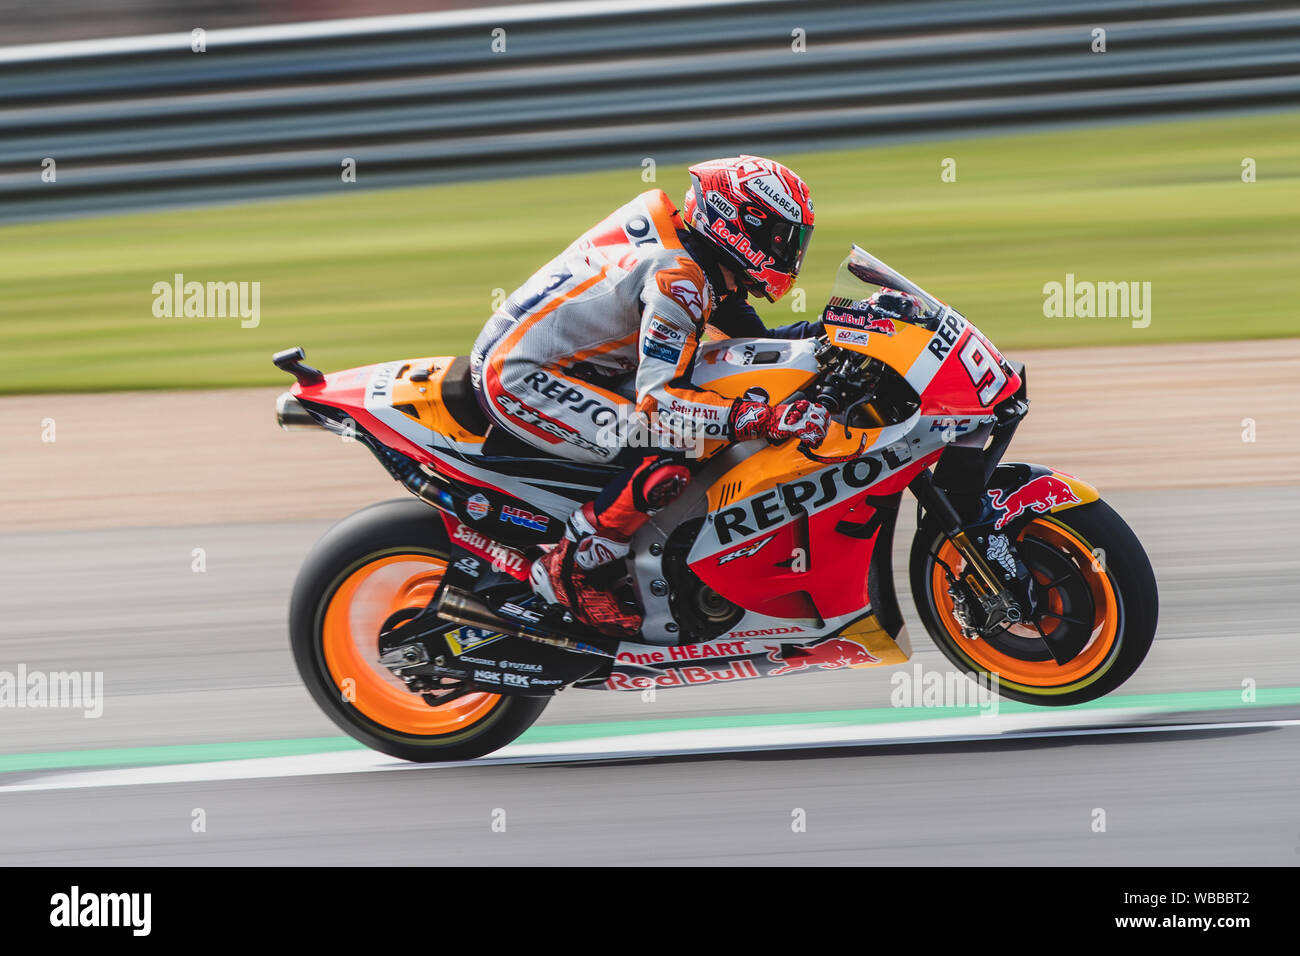 Silverstone Motogp High Resolution Stock Photography and Images - Alamy